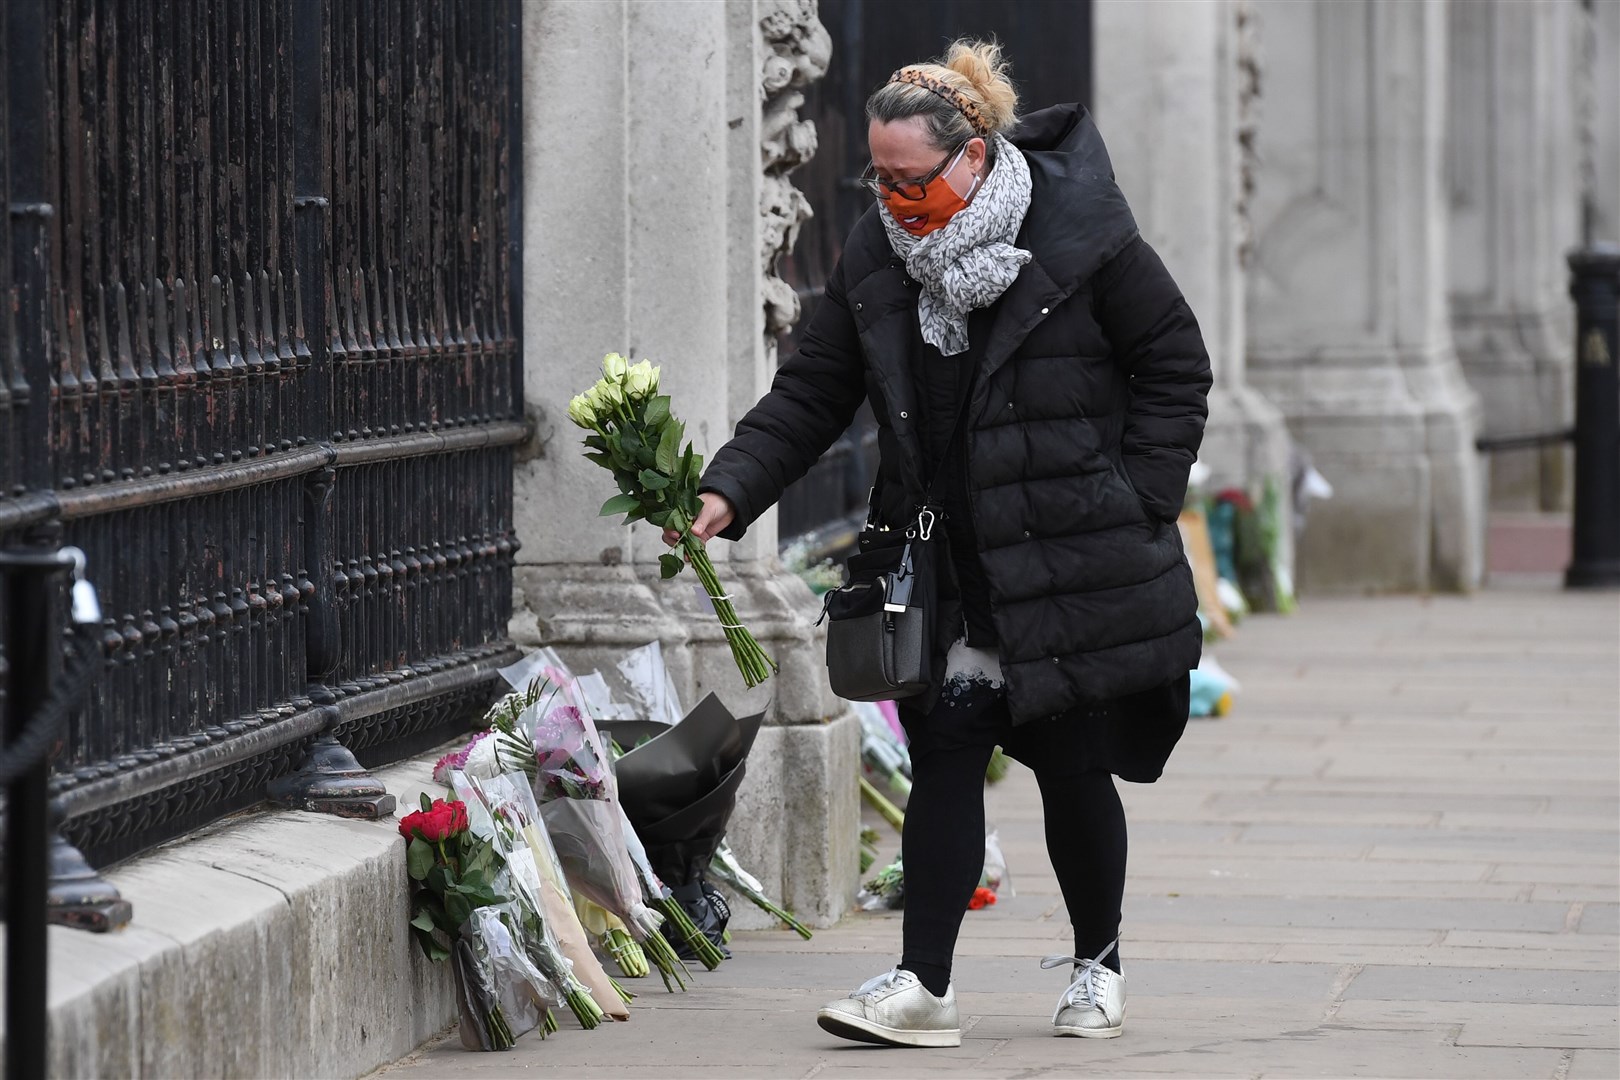 A woman leaves flowers to honour the duke’s memory (Kirsty O’Connor/PA)